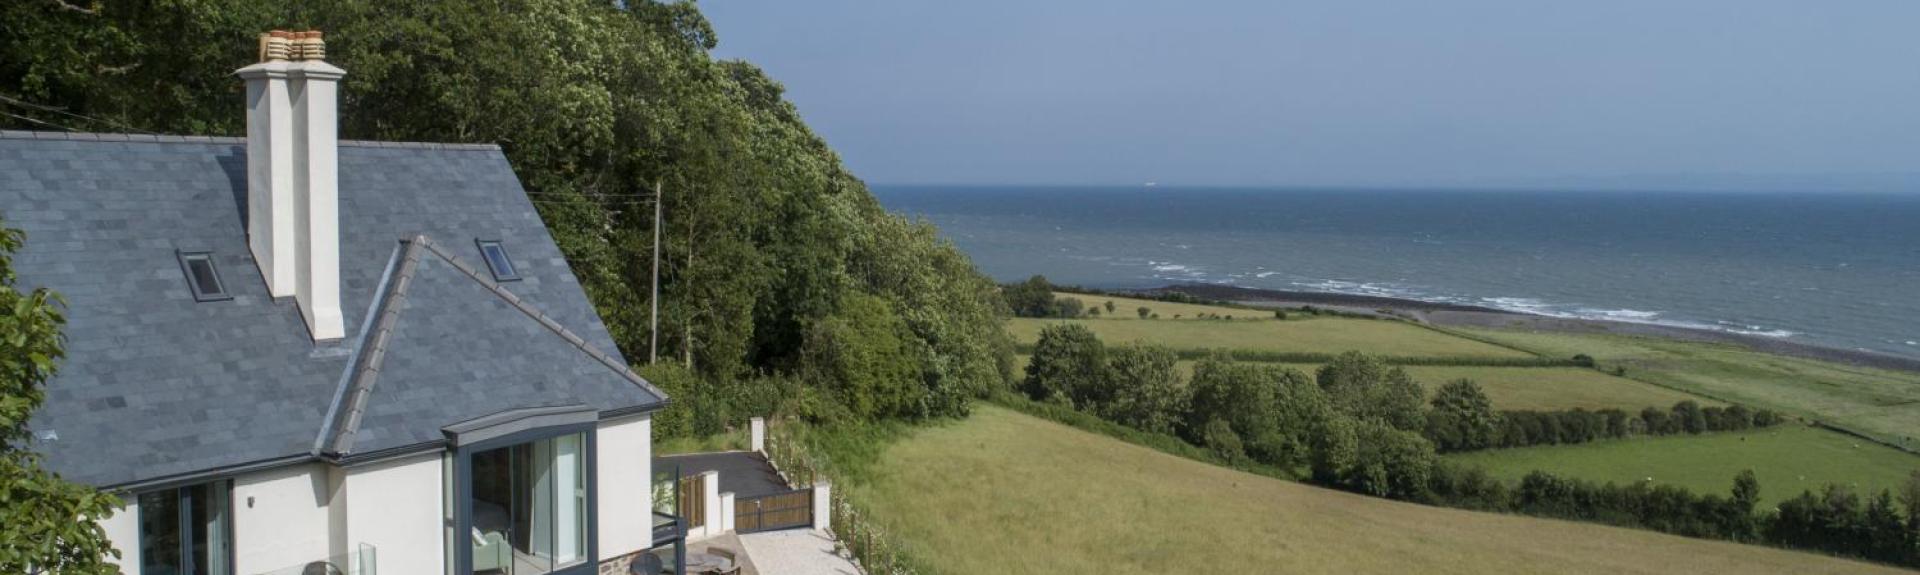 A large contemporary holiday cottage overlooks fields dipping down to a beach and ocean views.